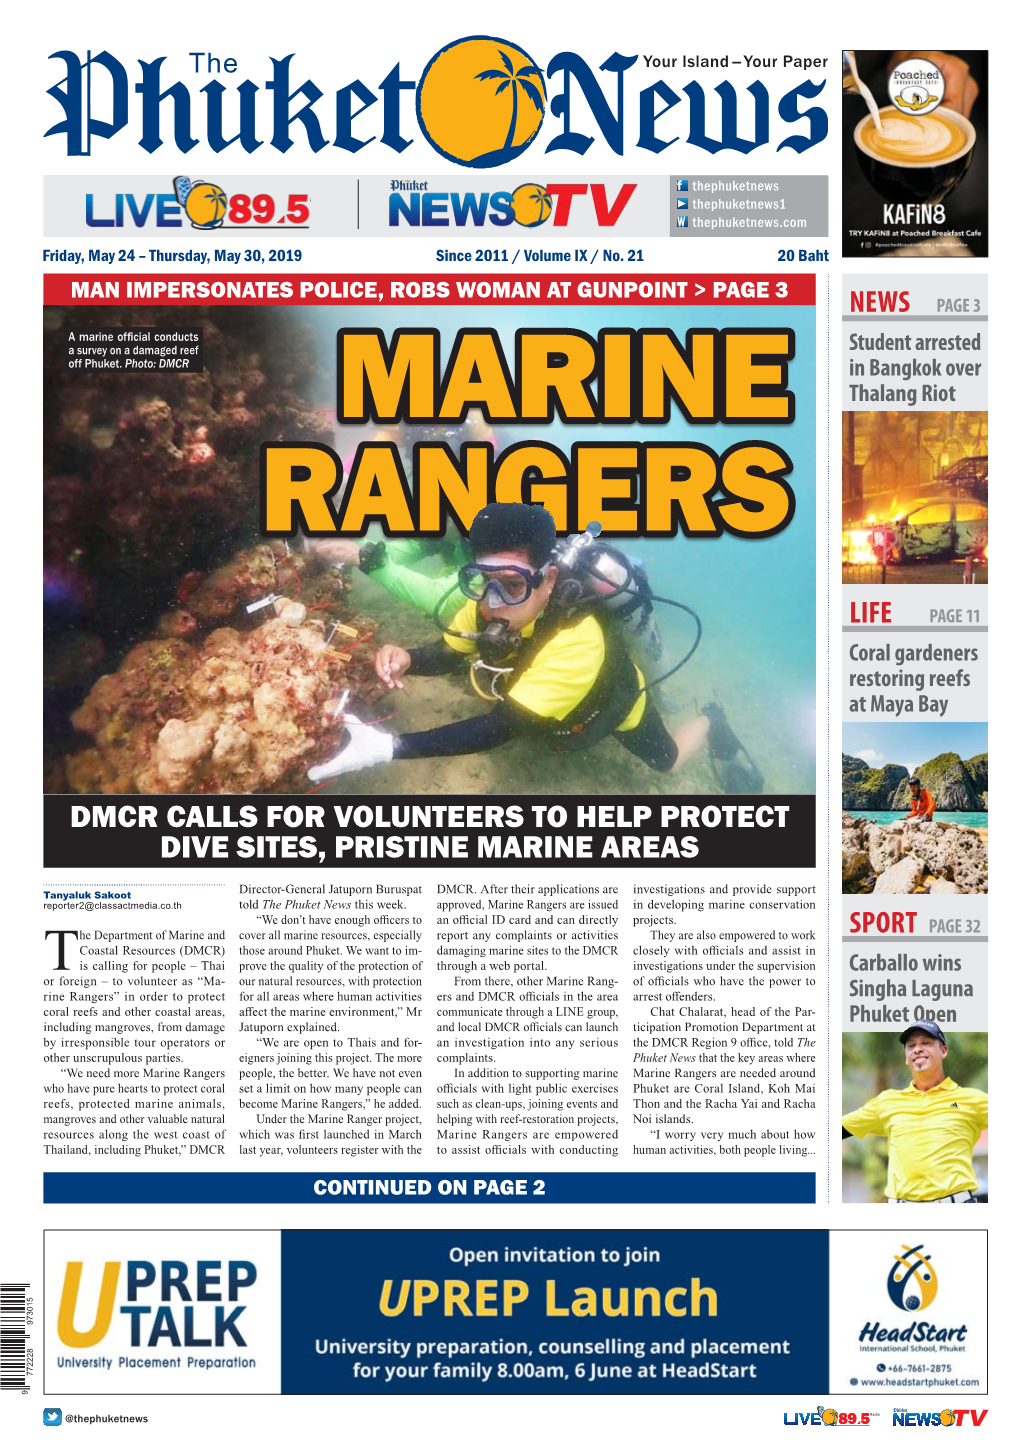 Dmcr Calls for Volunteers to Help Protect Dive Sites, Pristine Marine Areas